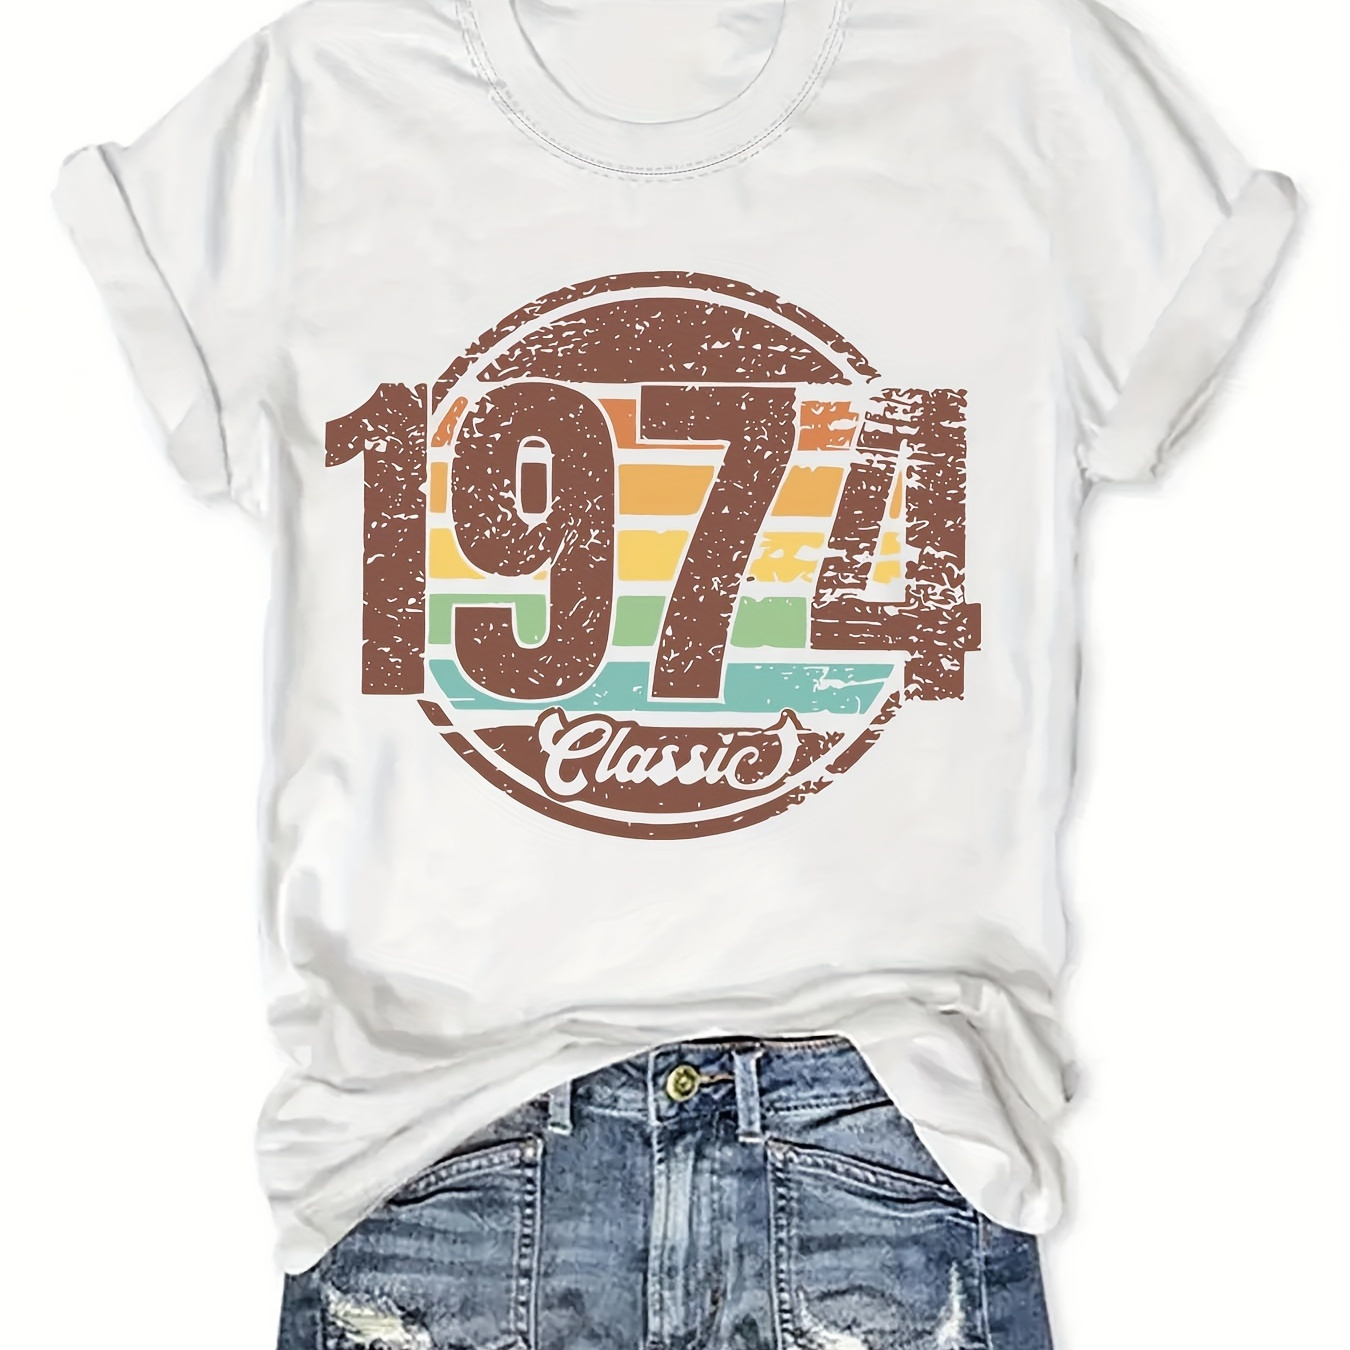 

Classic 1974 Print T-shirt, Short Sleeve Crew Neck Casual Top For Summer & Spring, Women's Clothing